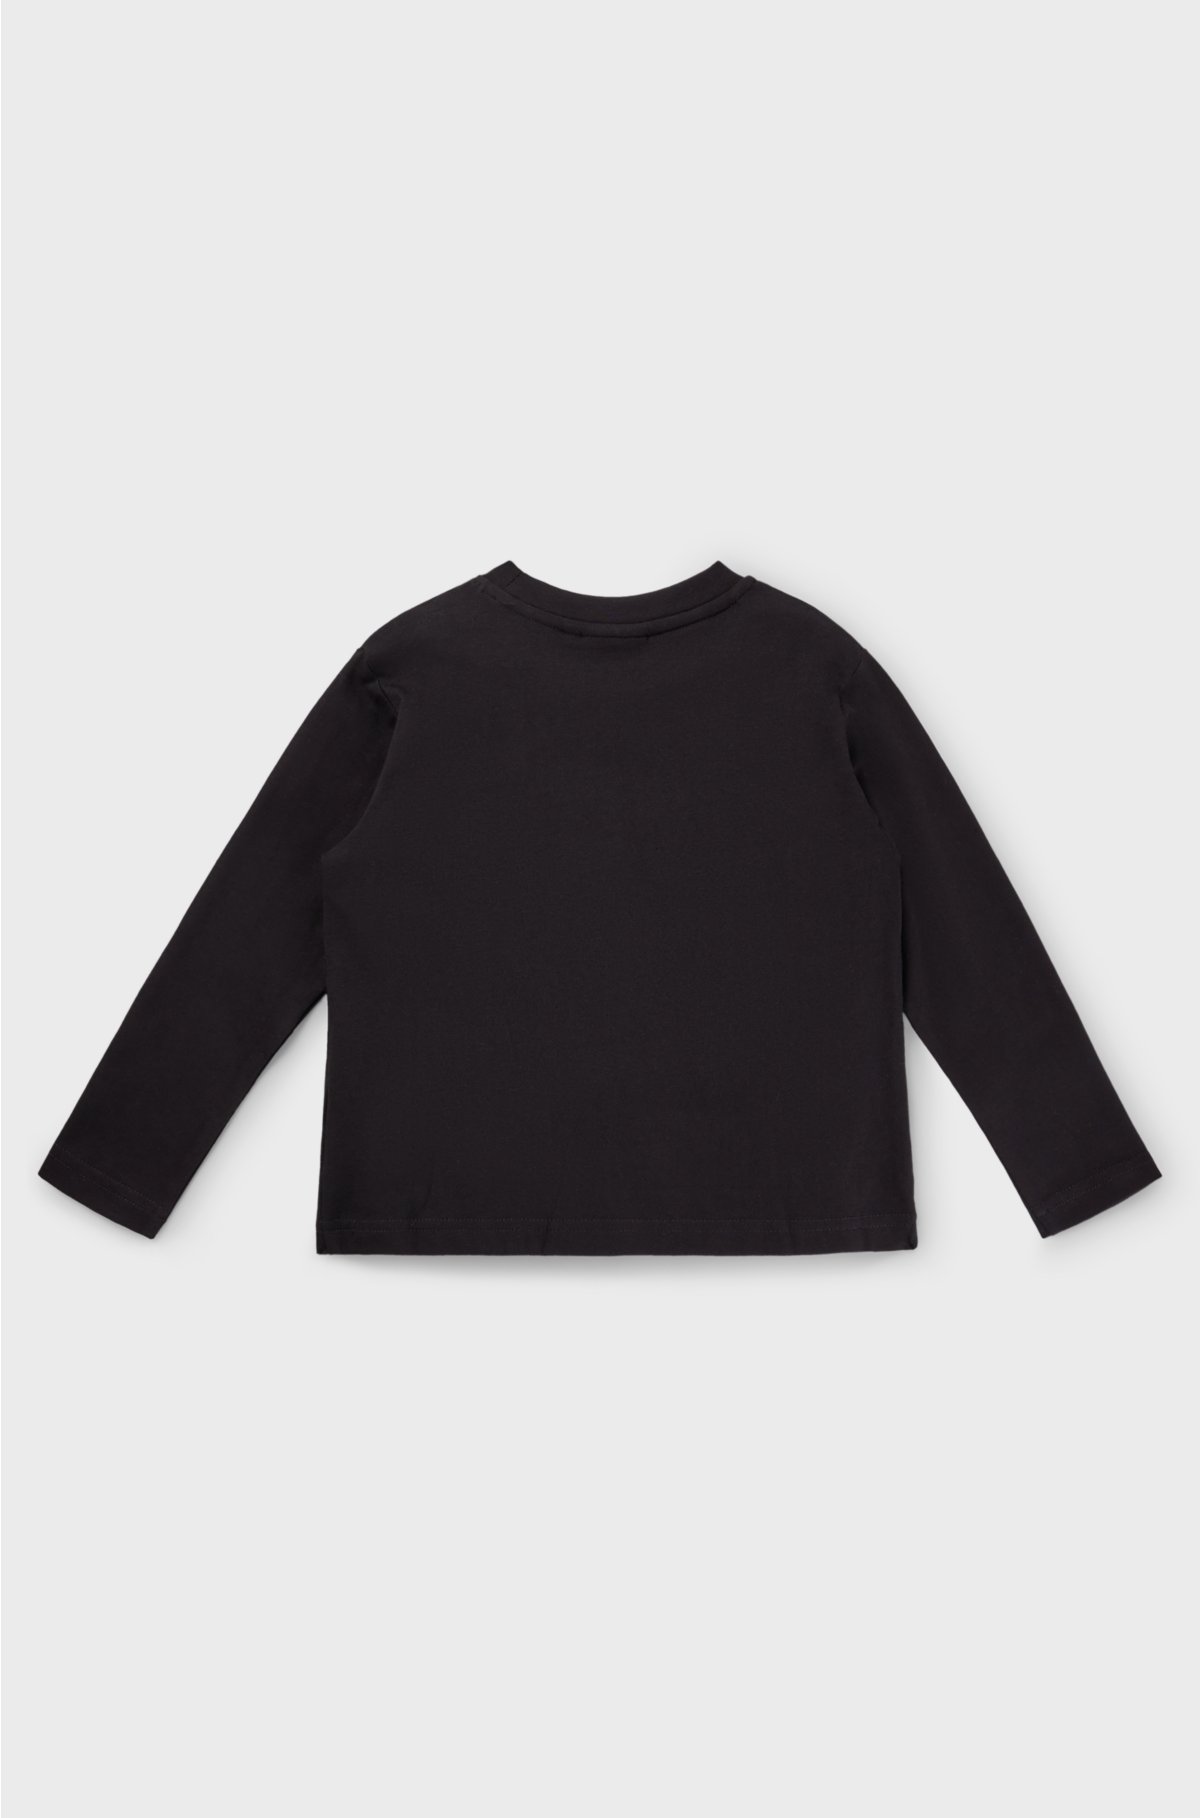 Kids' long-sleeved cotton T-shirt with textured framed logo, Black